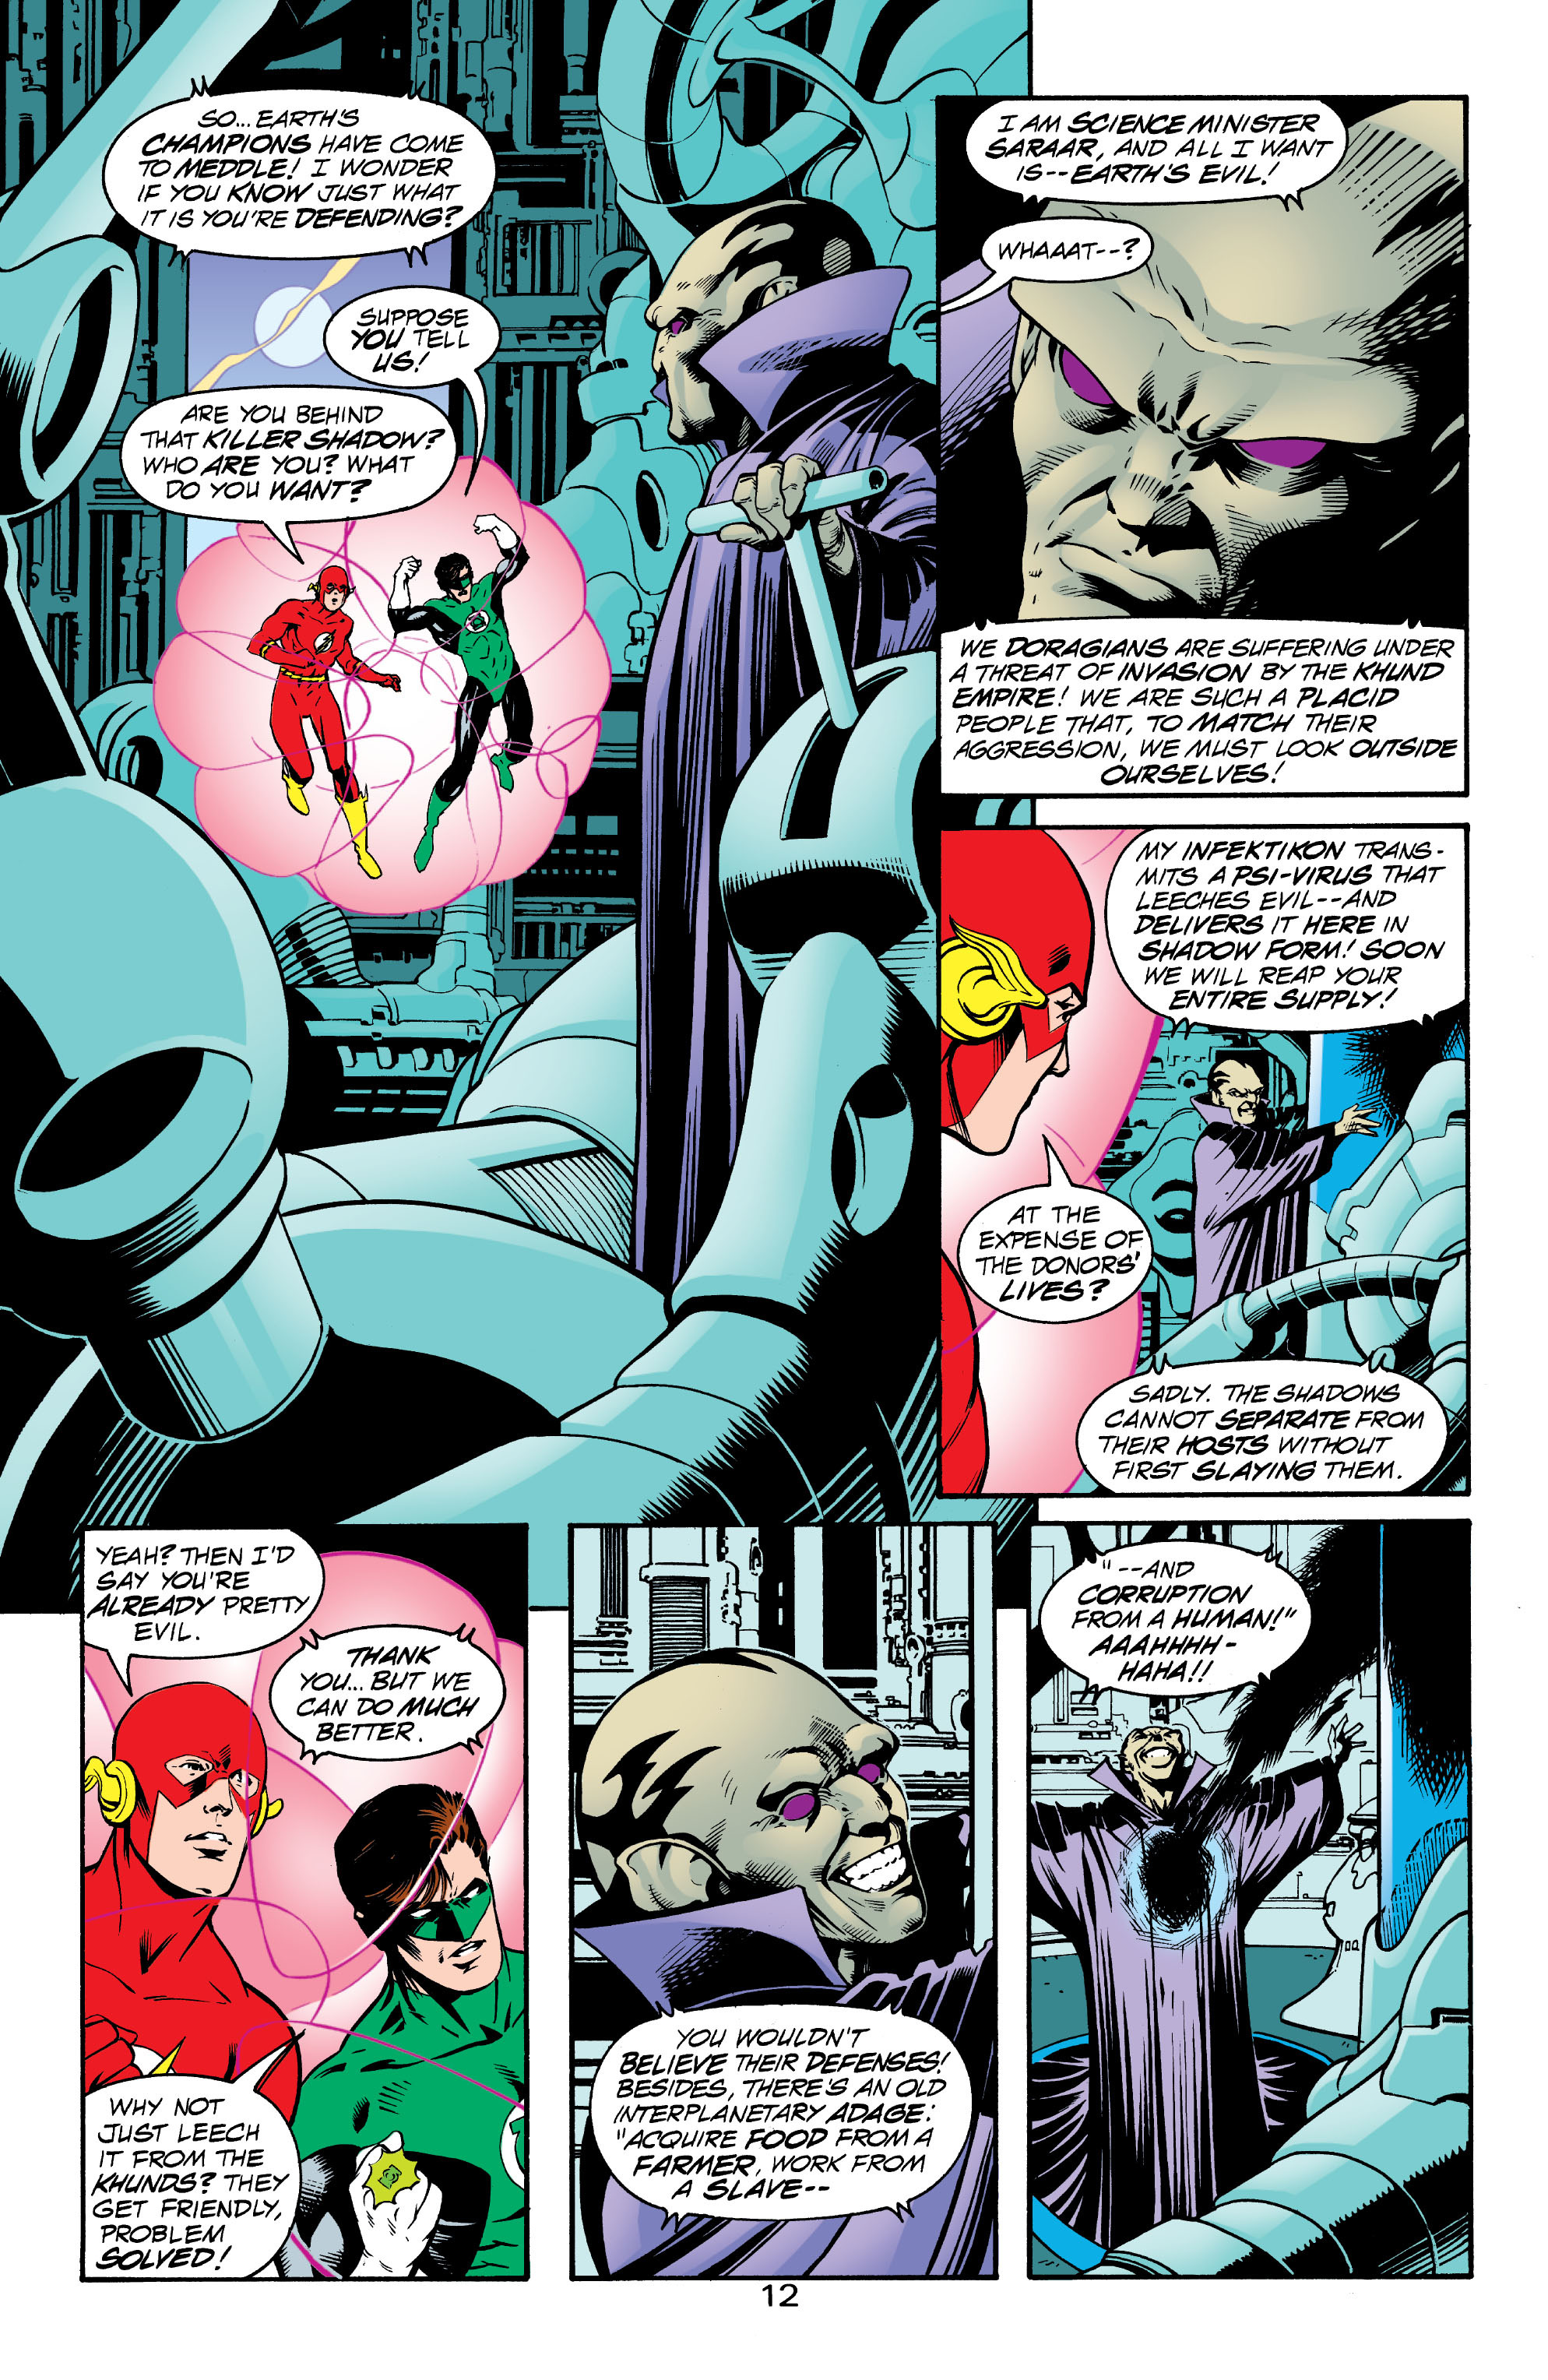 Flash & Green Lantern: The Brave and the Bold 1 Page 12